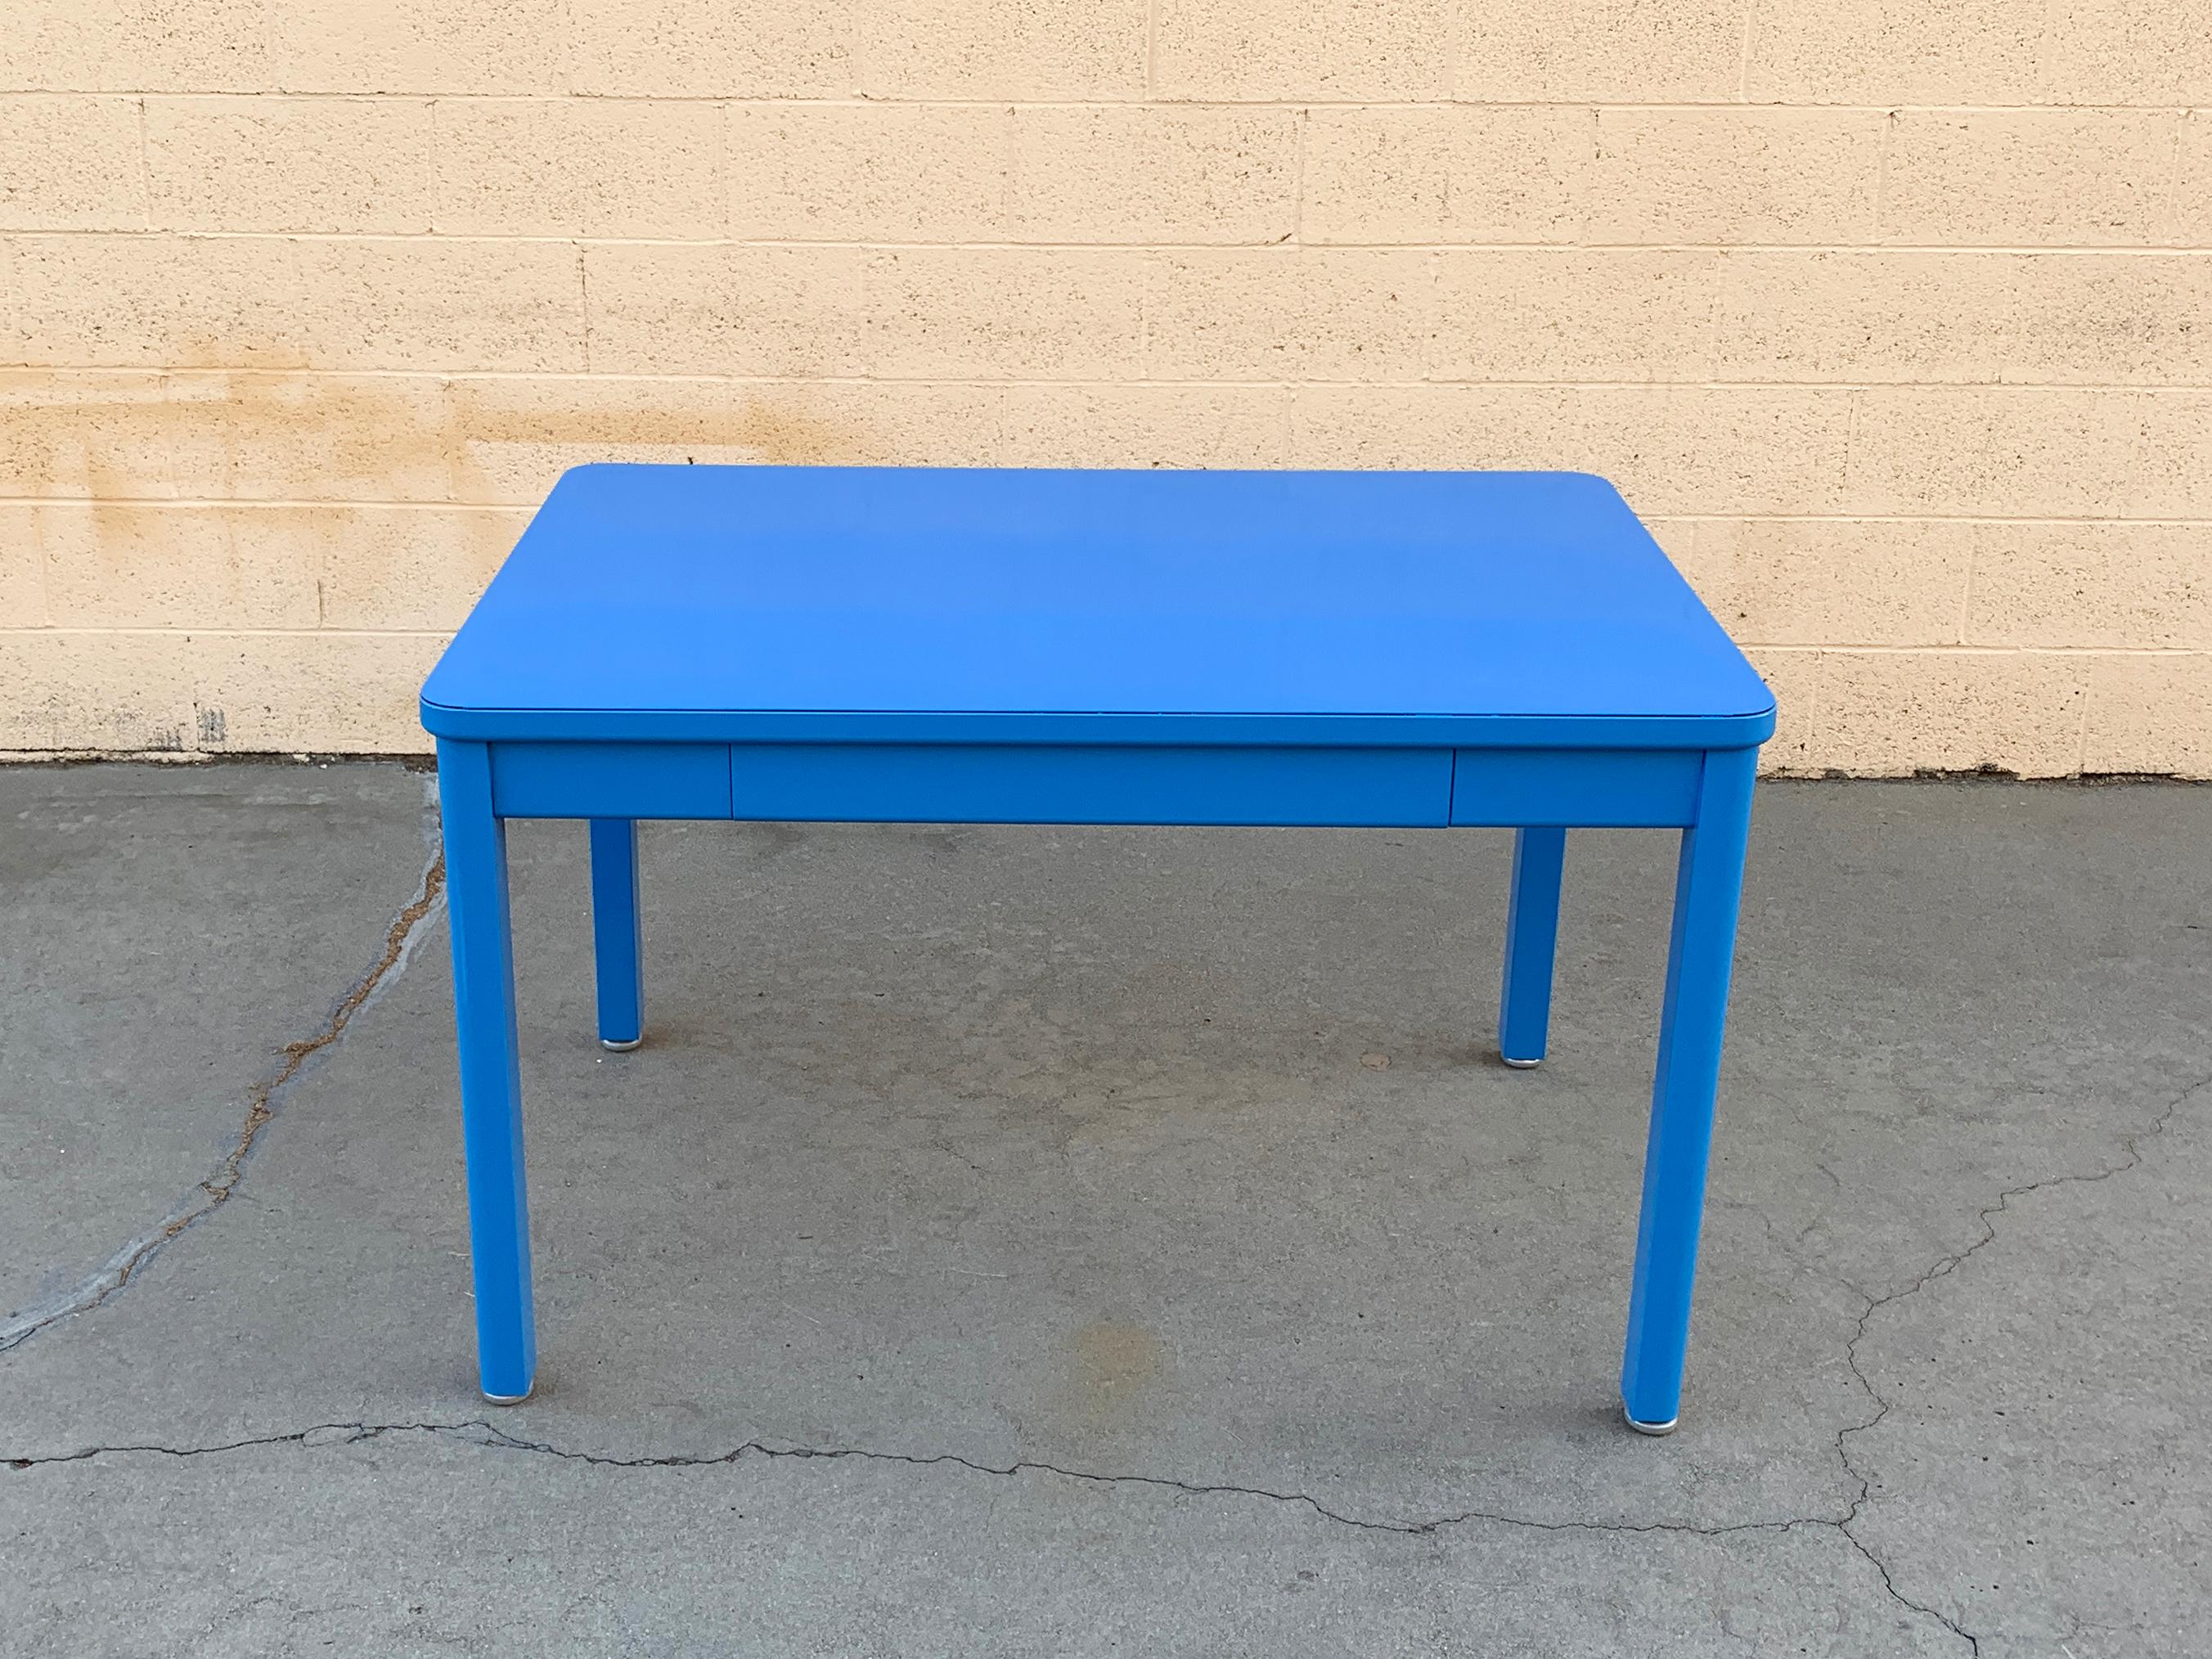 Mid-Century Modern 1960s Tanker Table by Steelcase, Refinished in Bright Blue